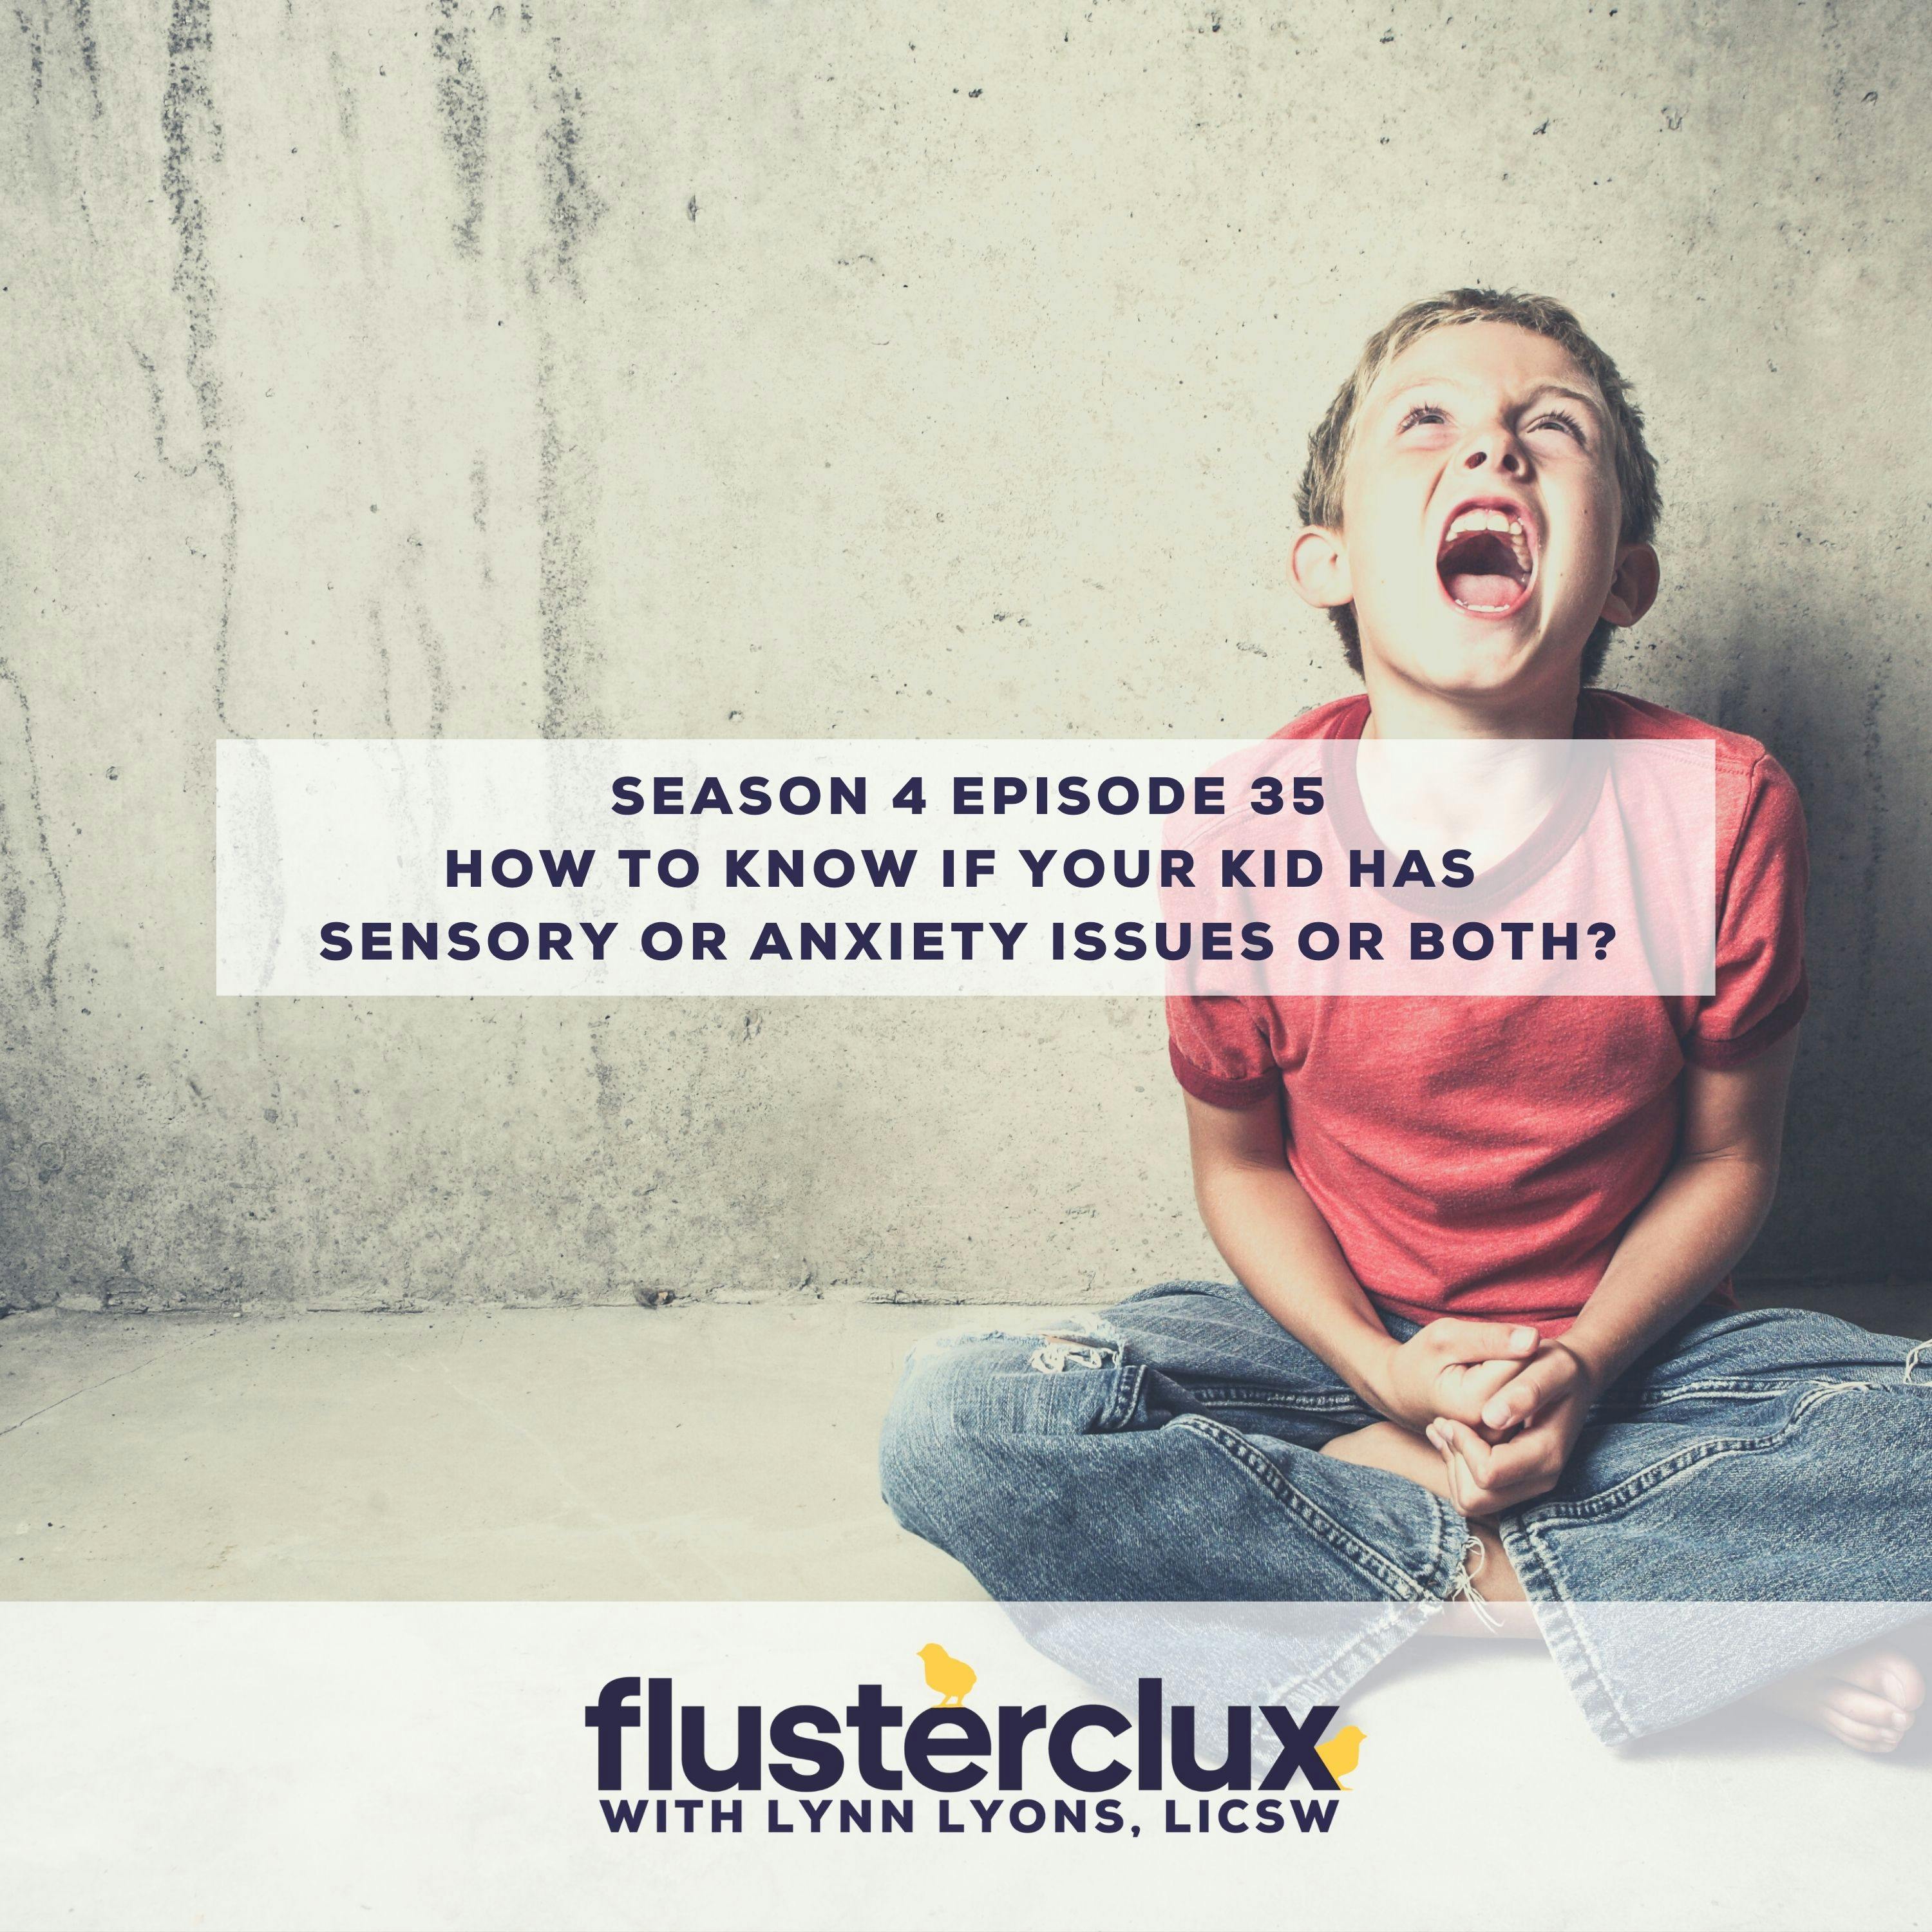 How to Know If Your Kid Has Sensory or Anxiety Issues or Both